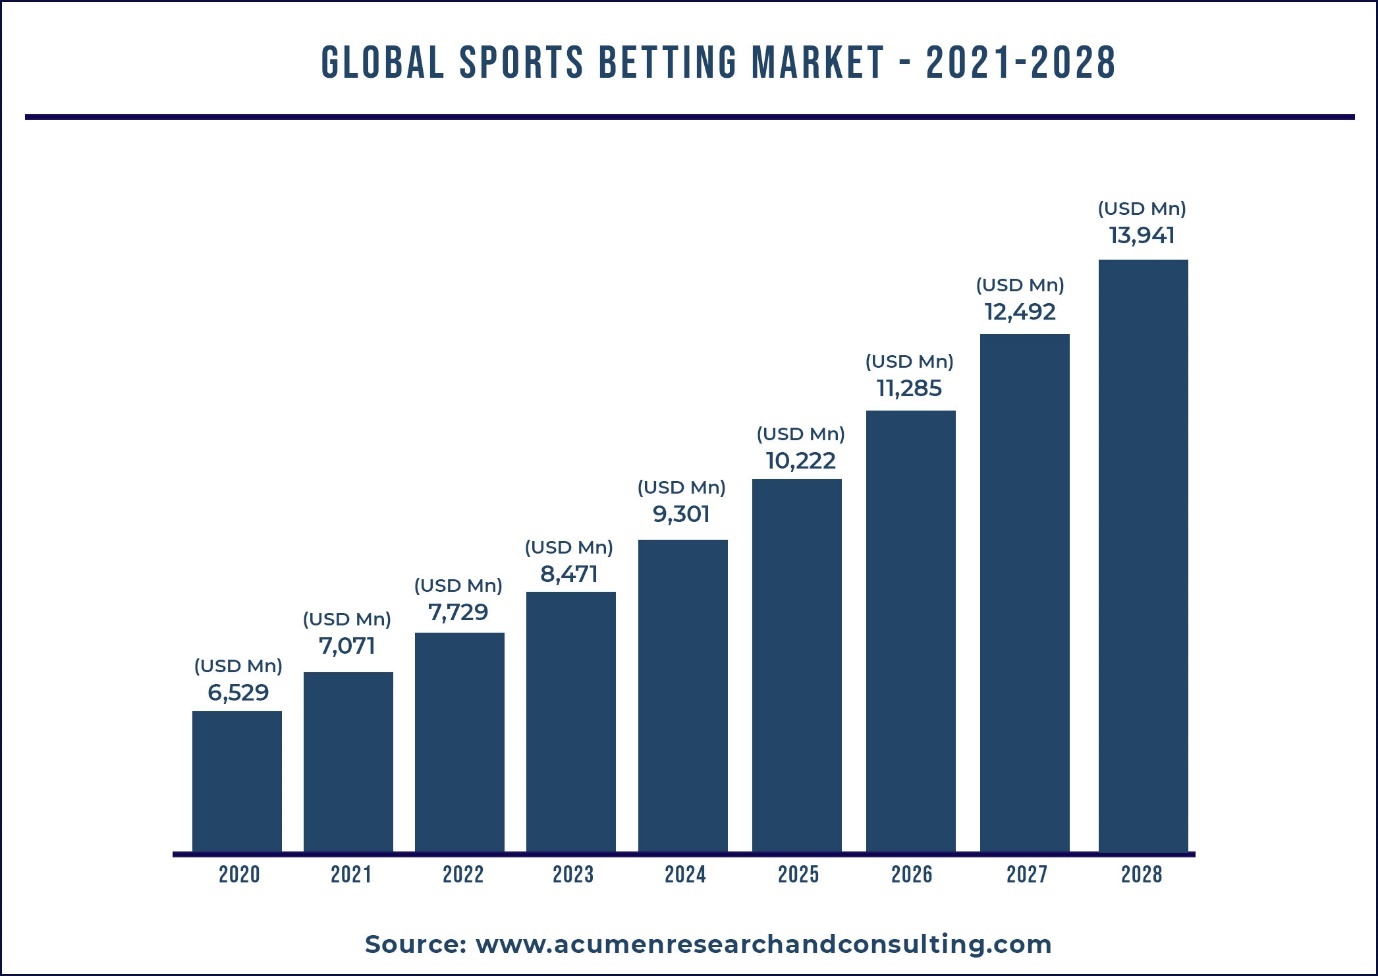 Sports Betting Market Surpass US$ 13,941 Mn by 2028 | CAGR